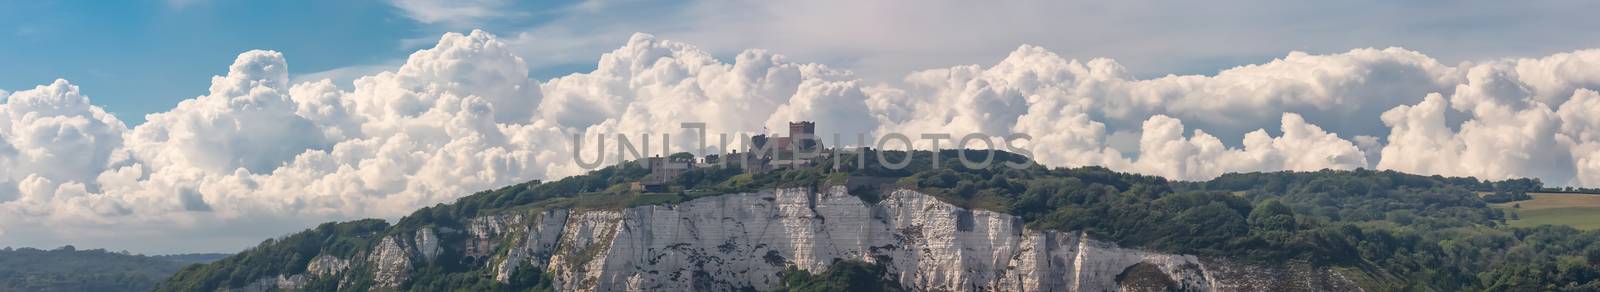 Wide angle panoramic shot of the White Cliffs of Dover, a castle on top of the cliff. Beautiful fluffy clouds and blue sky in the background.